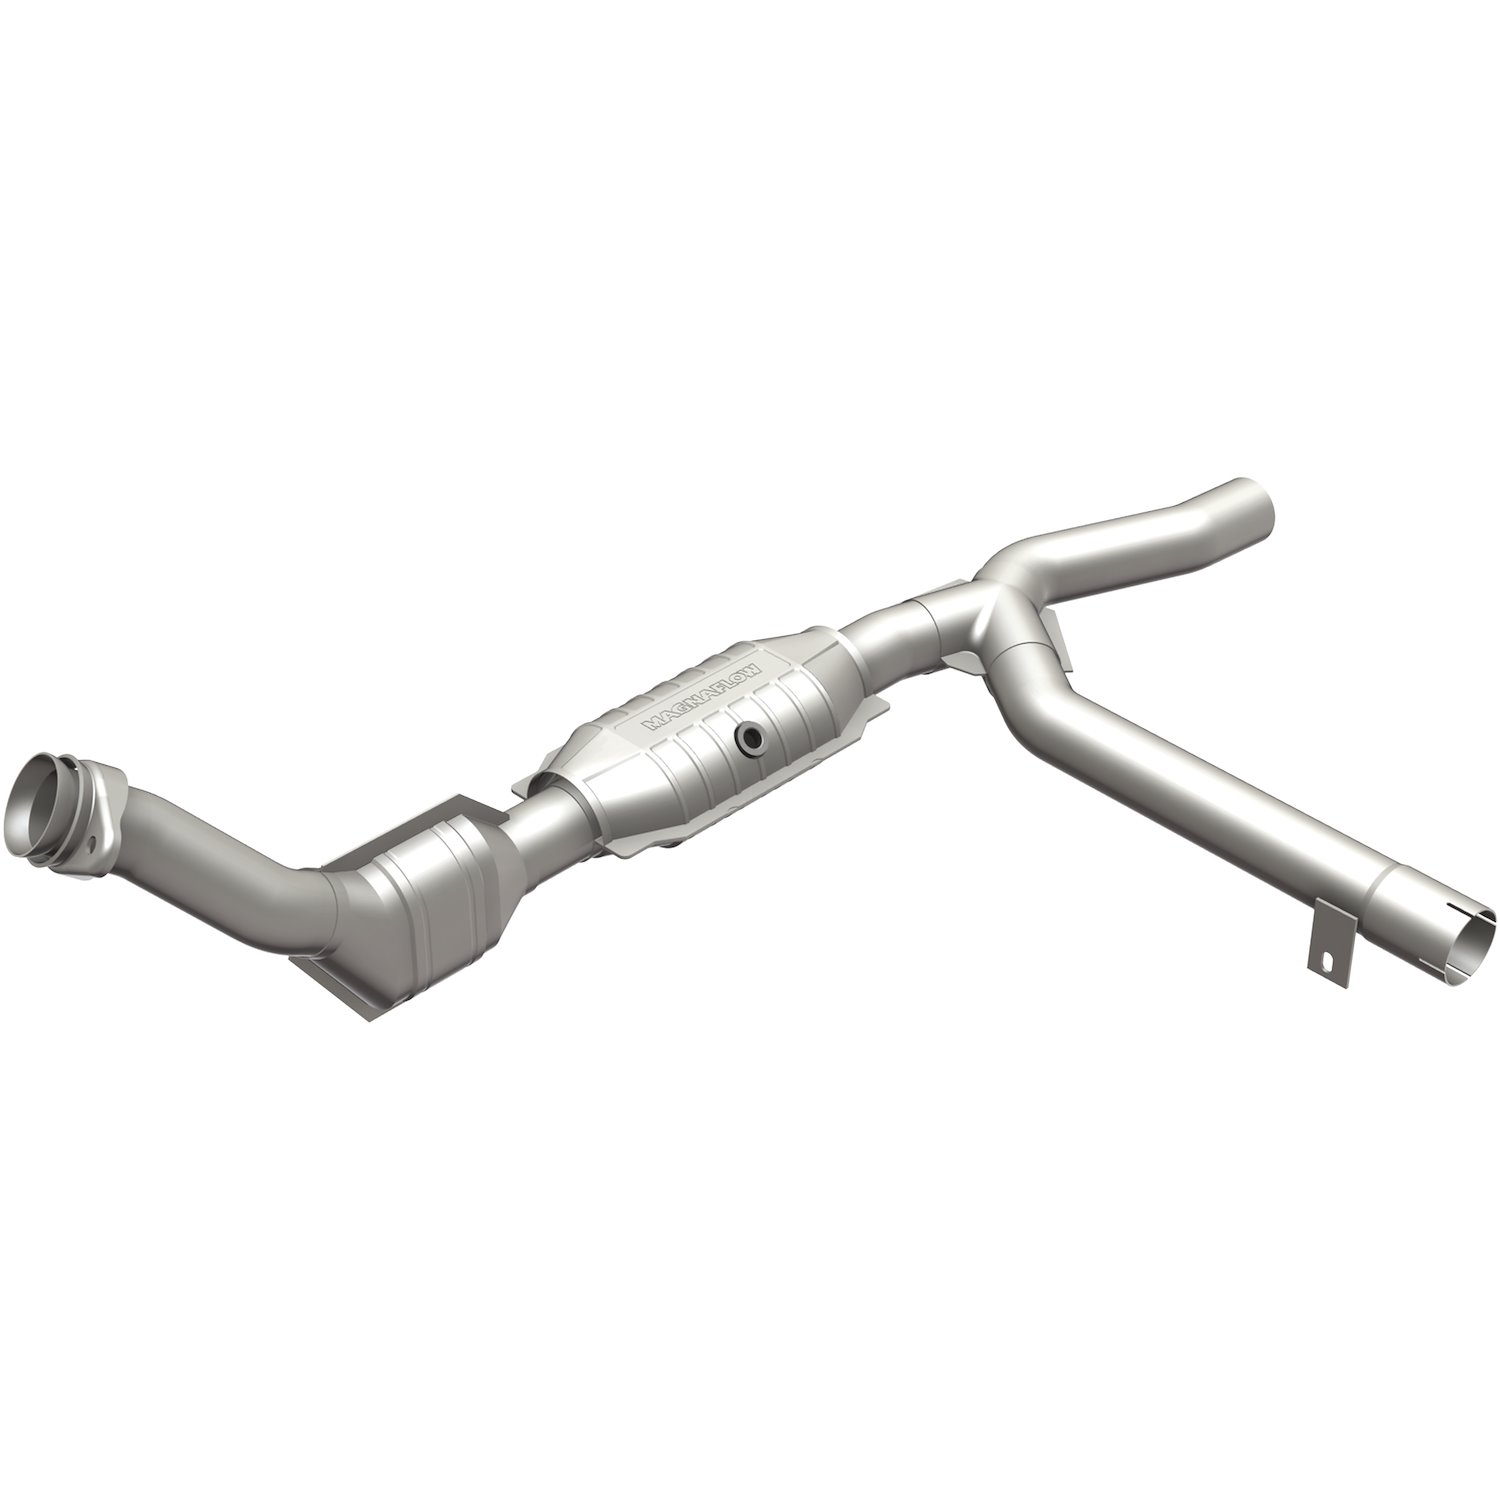 HM Grade Federal / EPA Compliant Direct-Fit Catalytic Converter 93153